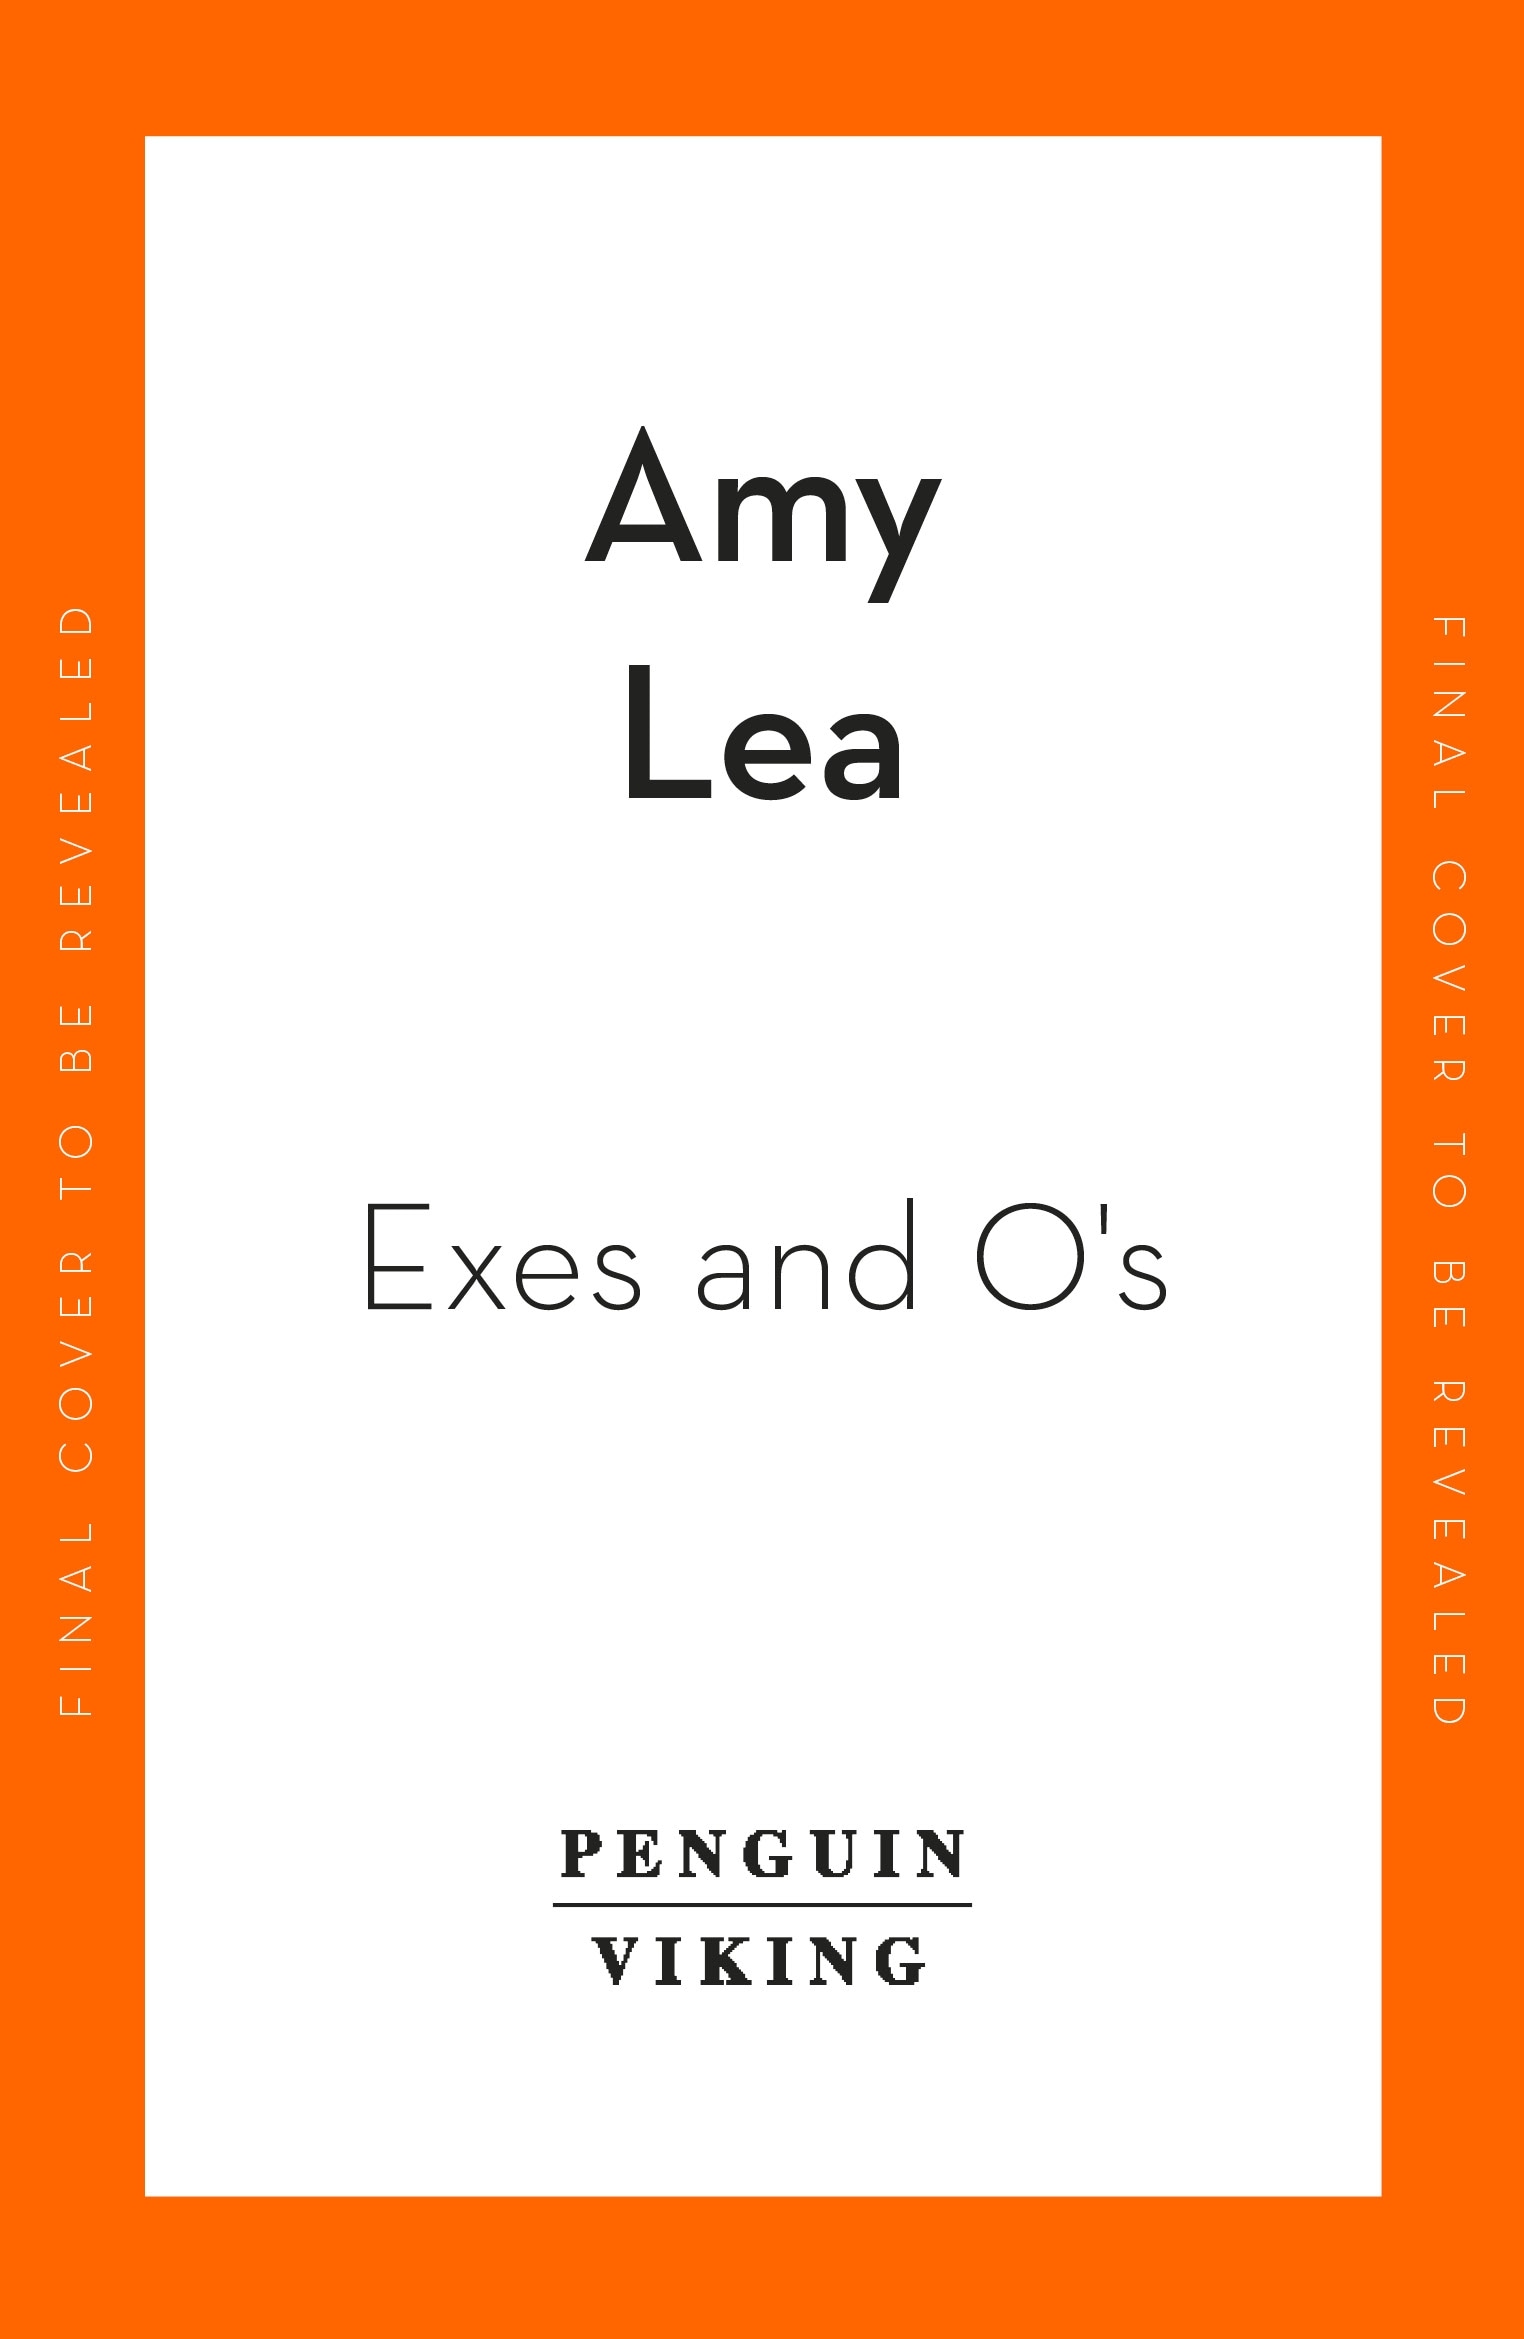 Book “Exes and O's” by Amy Lea — January 12, 2023